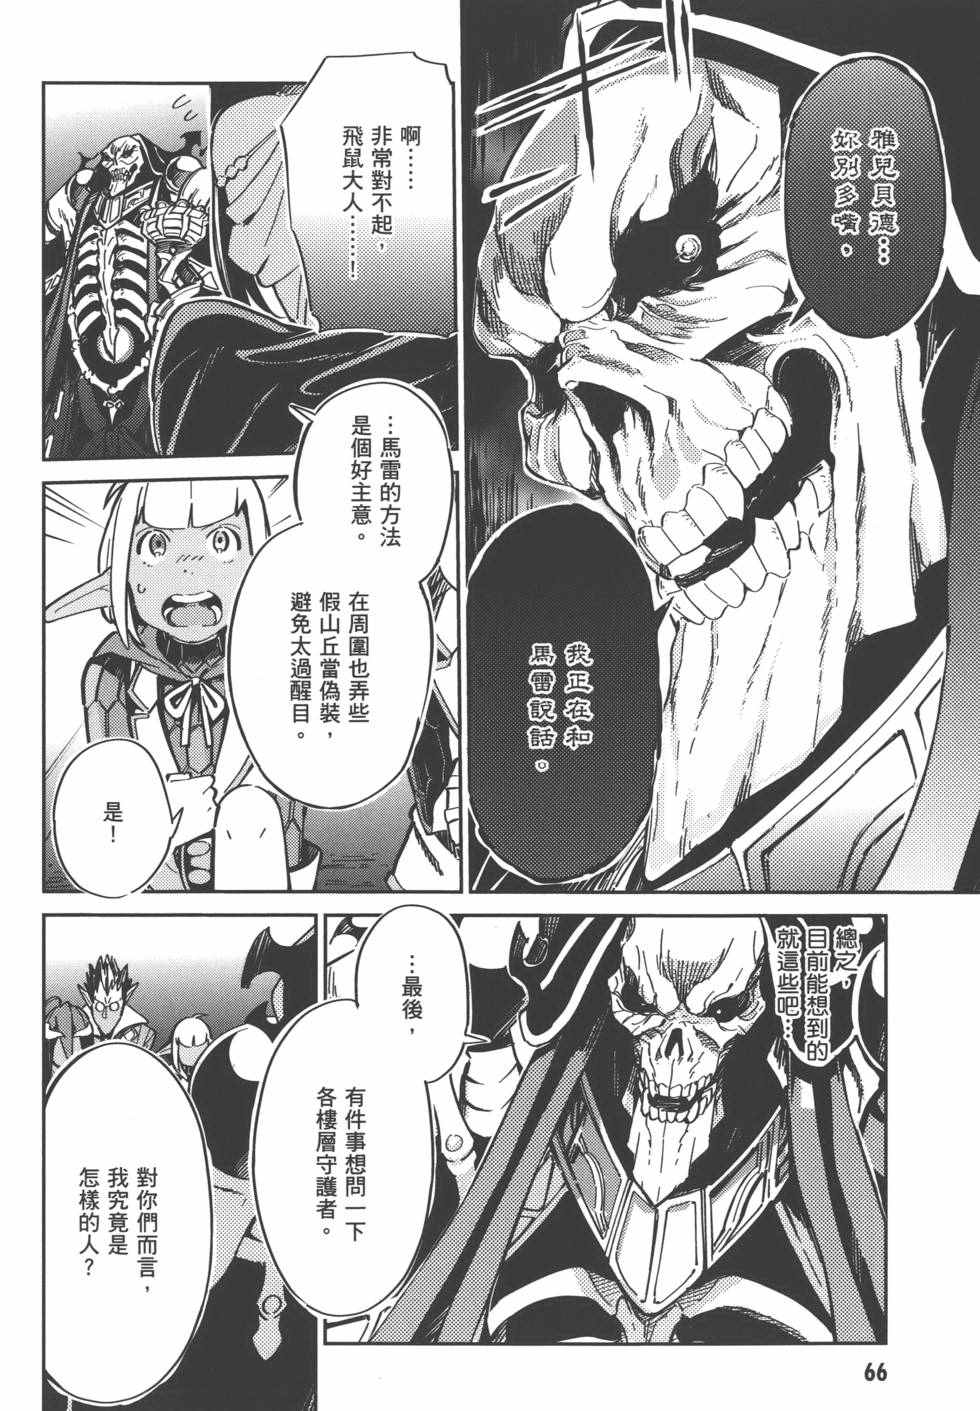 OVERLORD - 第1卷(2/4) - 6